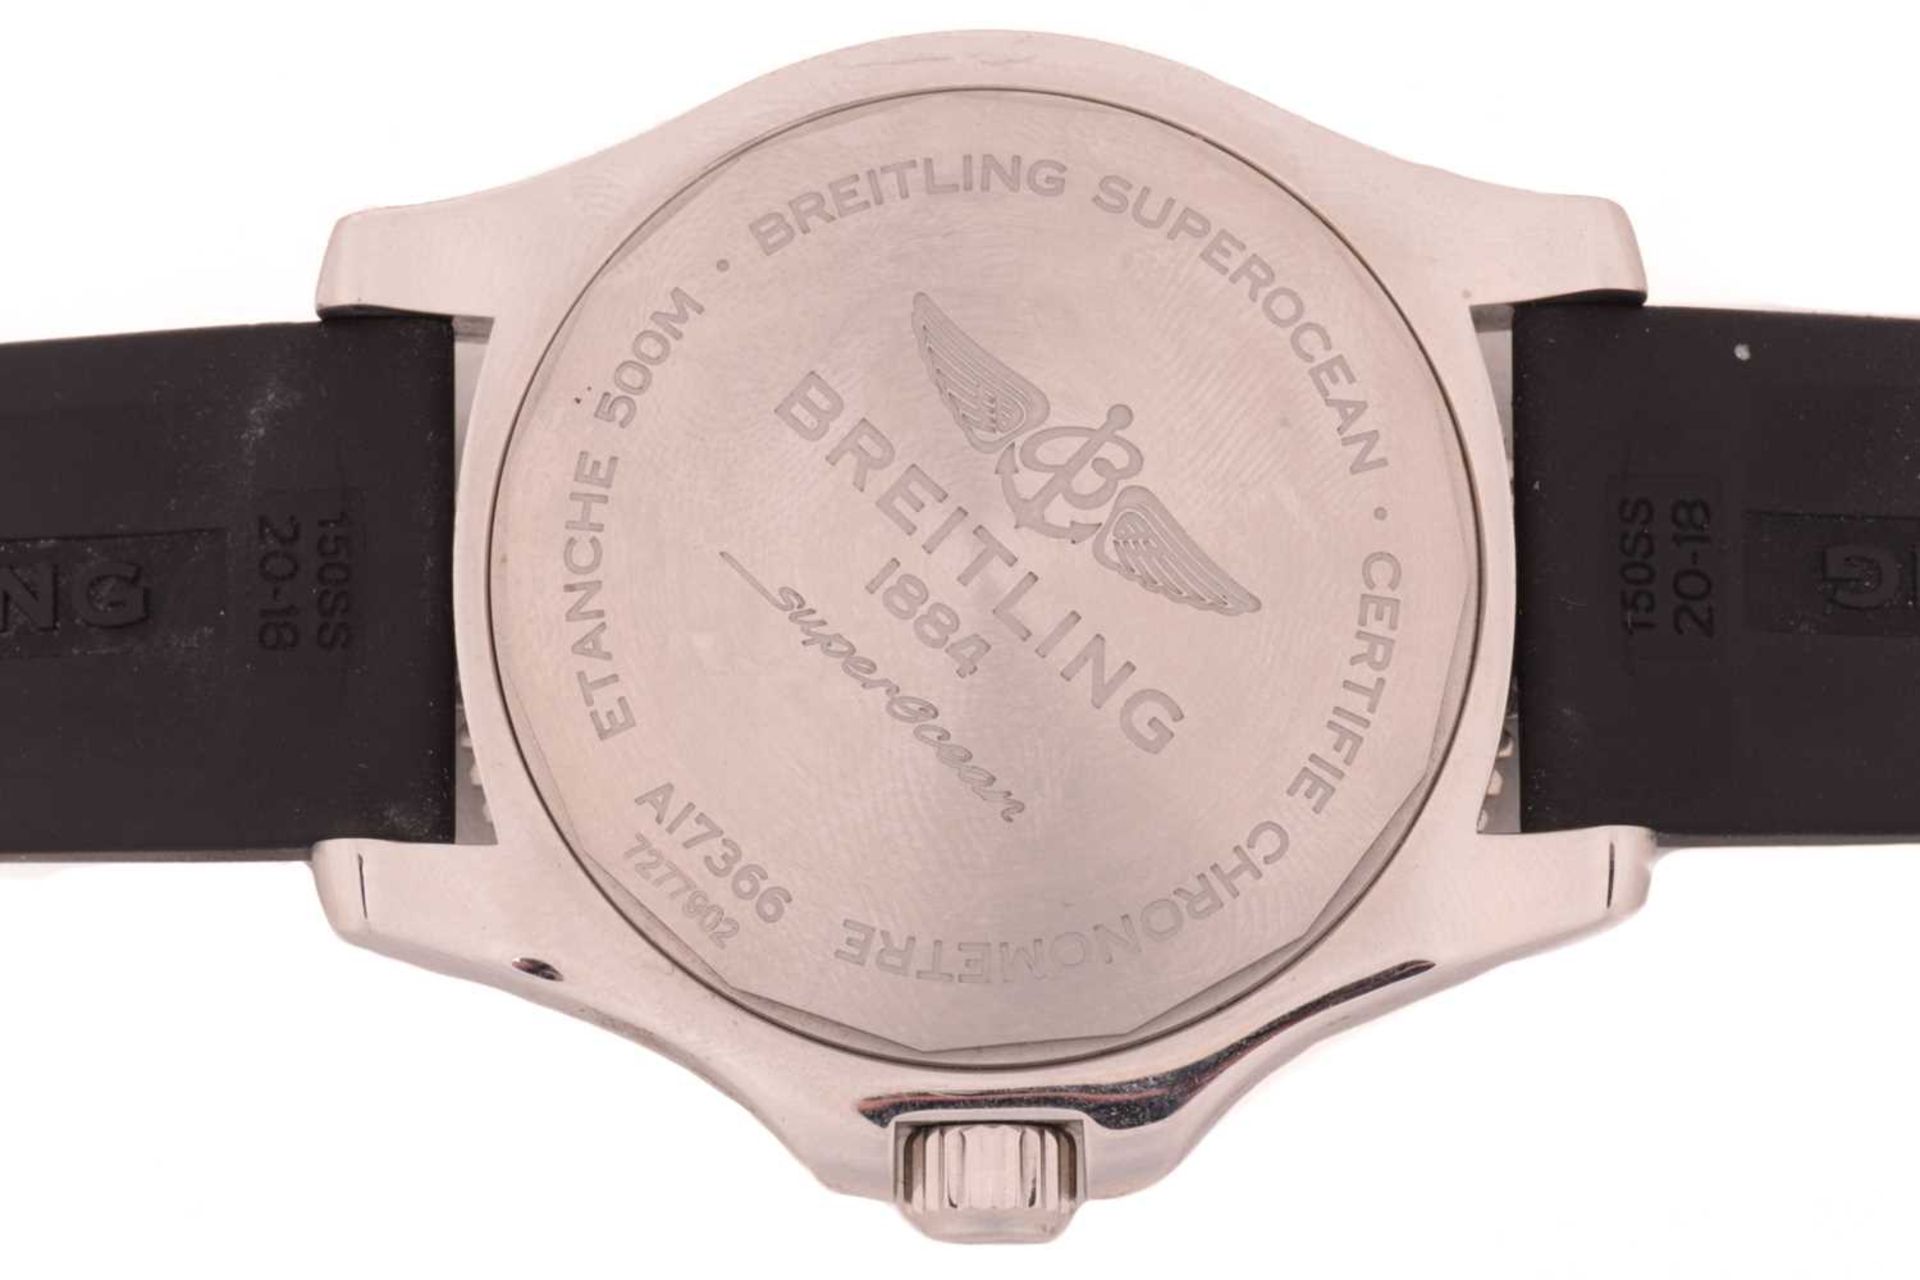 A Breitling Superocean chronometer, featuring a Swiss-made automatic movement in a steel case - Image 5 of 10